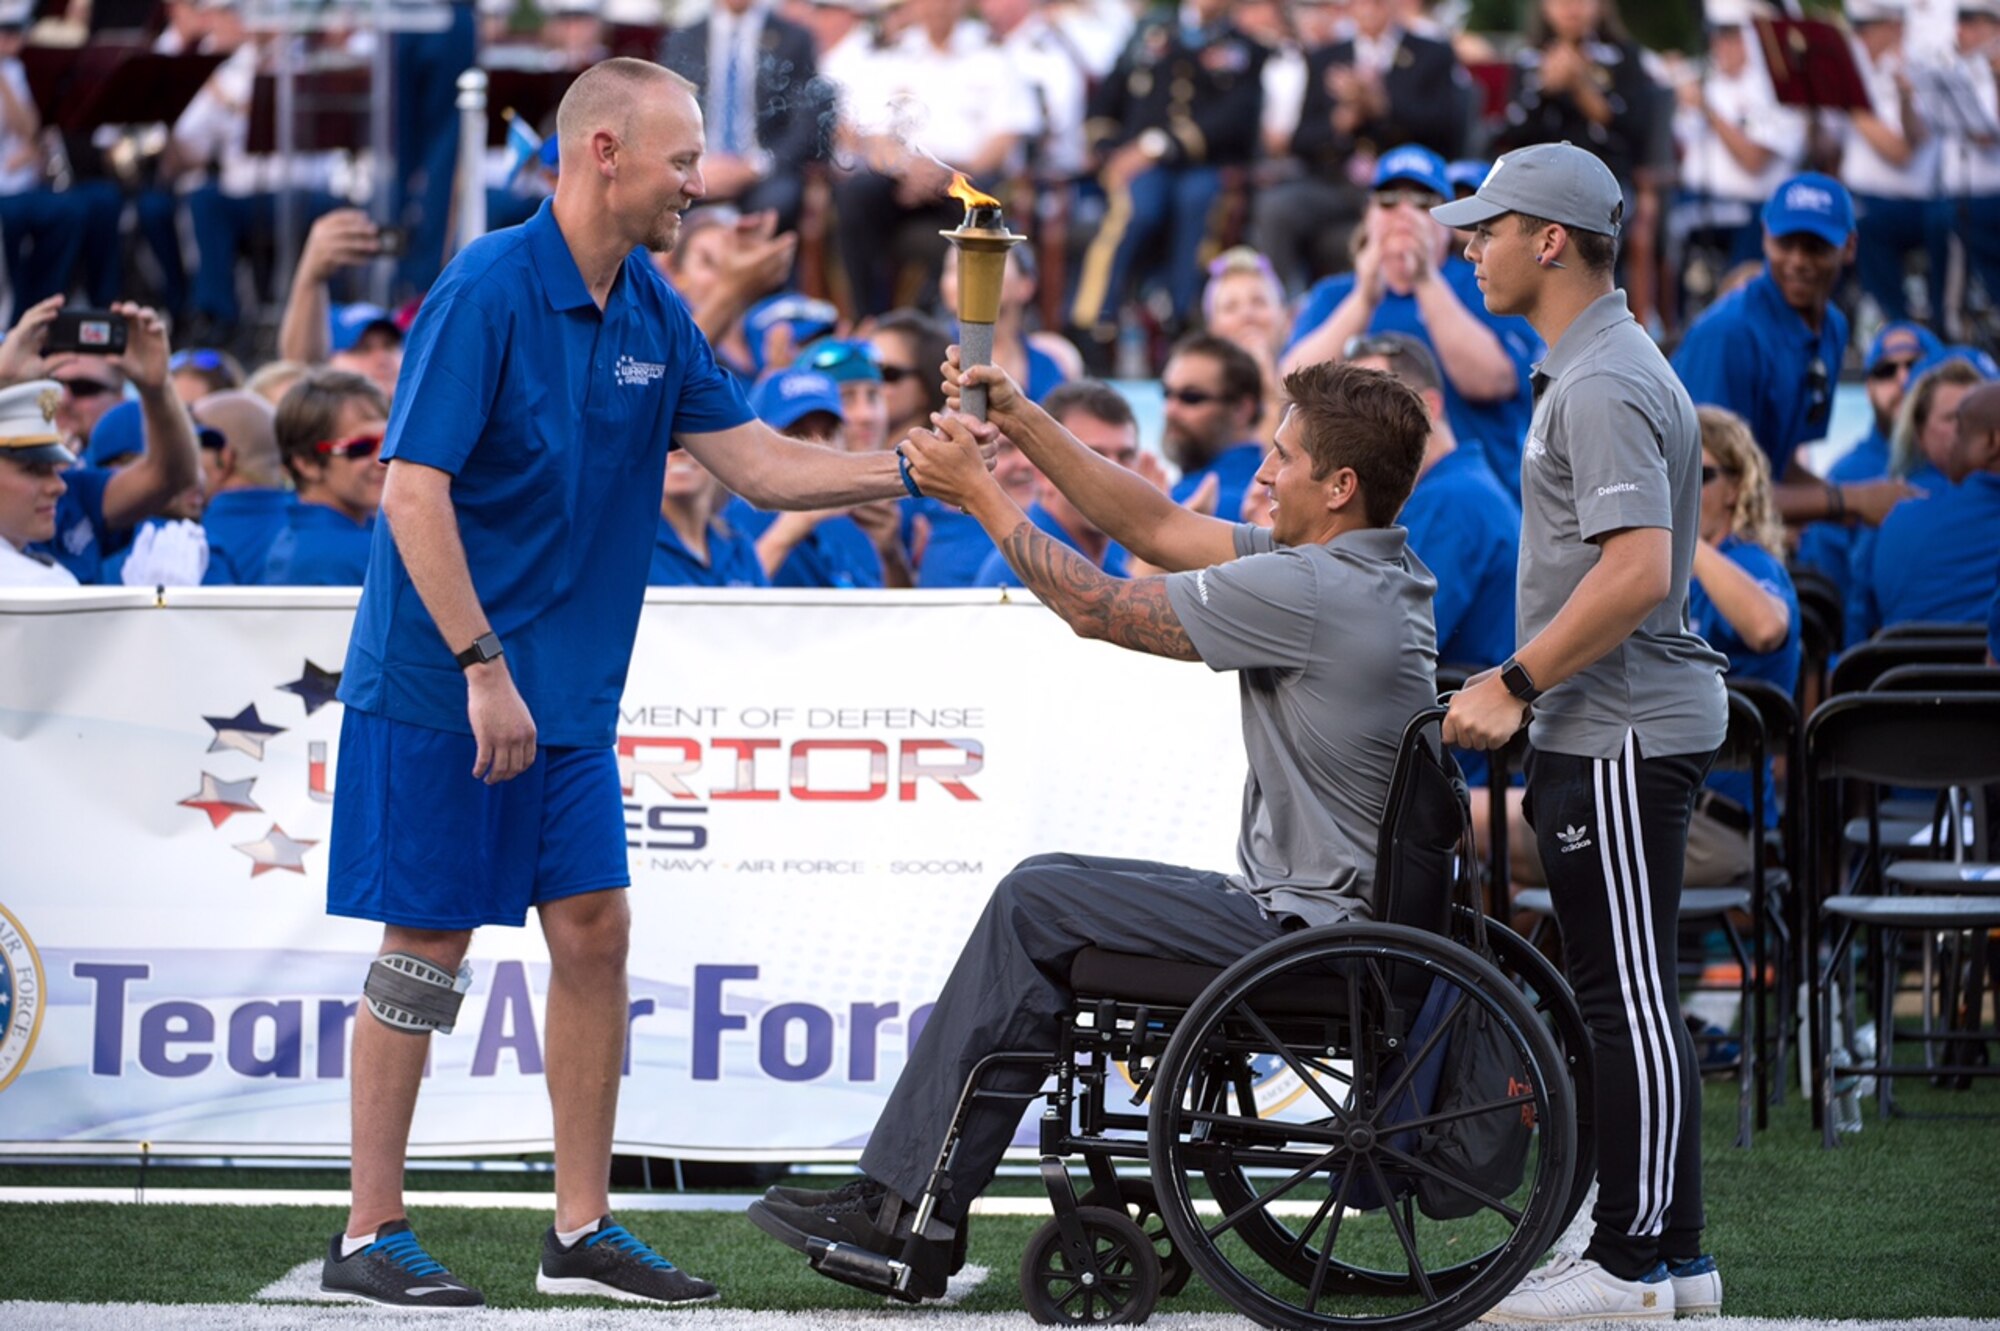 Retired Air Force Capt. Chris Cochrane, left, accepts the 2016 Department of Defense Warrior Games torch from Navy Lt. Ramesh Haytasingh of the U.S. Special Operations Command team during opening ceremonies at the U.S. Military Academy in West Point, N.Y., June 15, 2016. With Haytasingh is his son, Tobias. (Department of Defense photo/EJ Hersom)